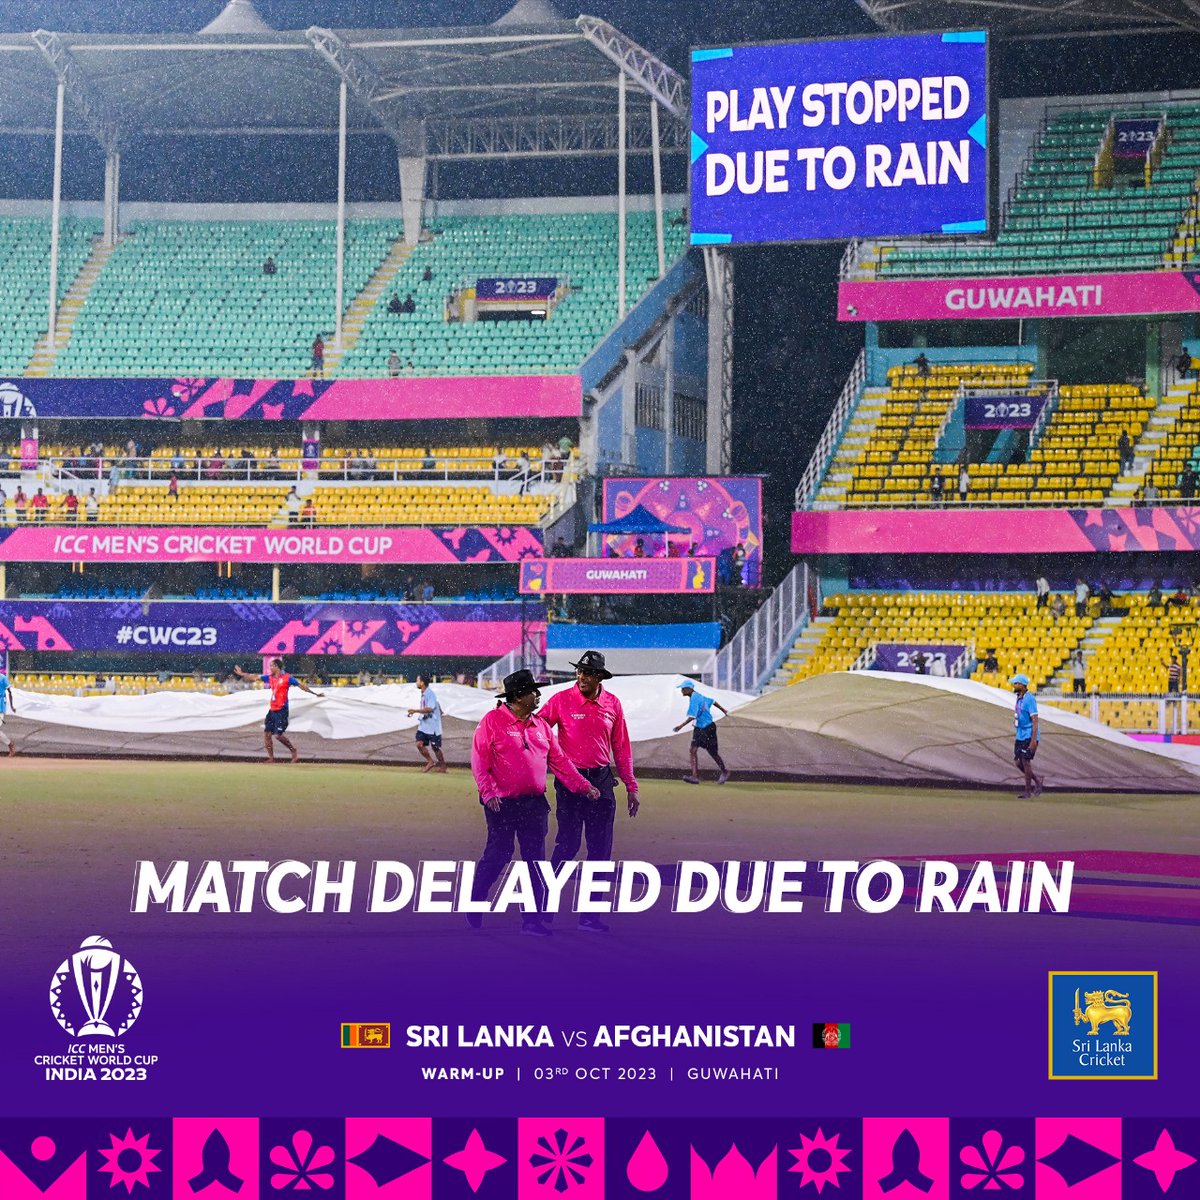 Match Delayed due to rain - Pitch inspection at 09:20PM.

#SLvAFG #LankanLions #CWC23